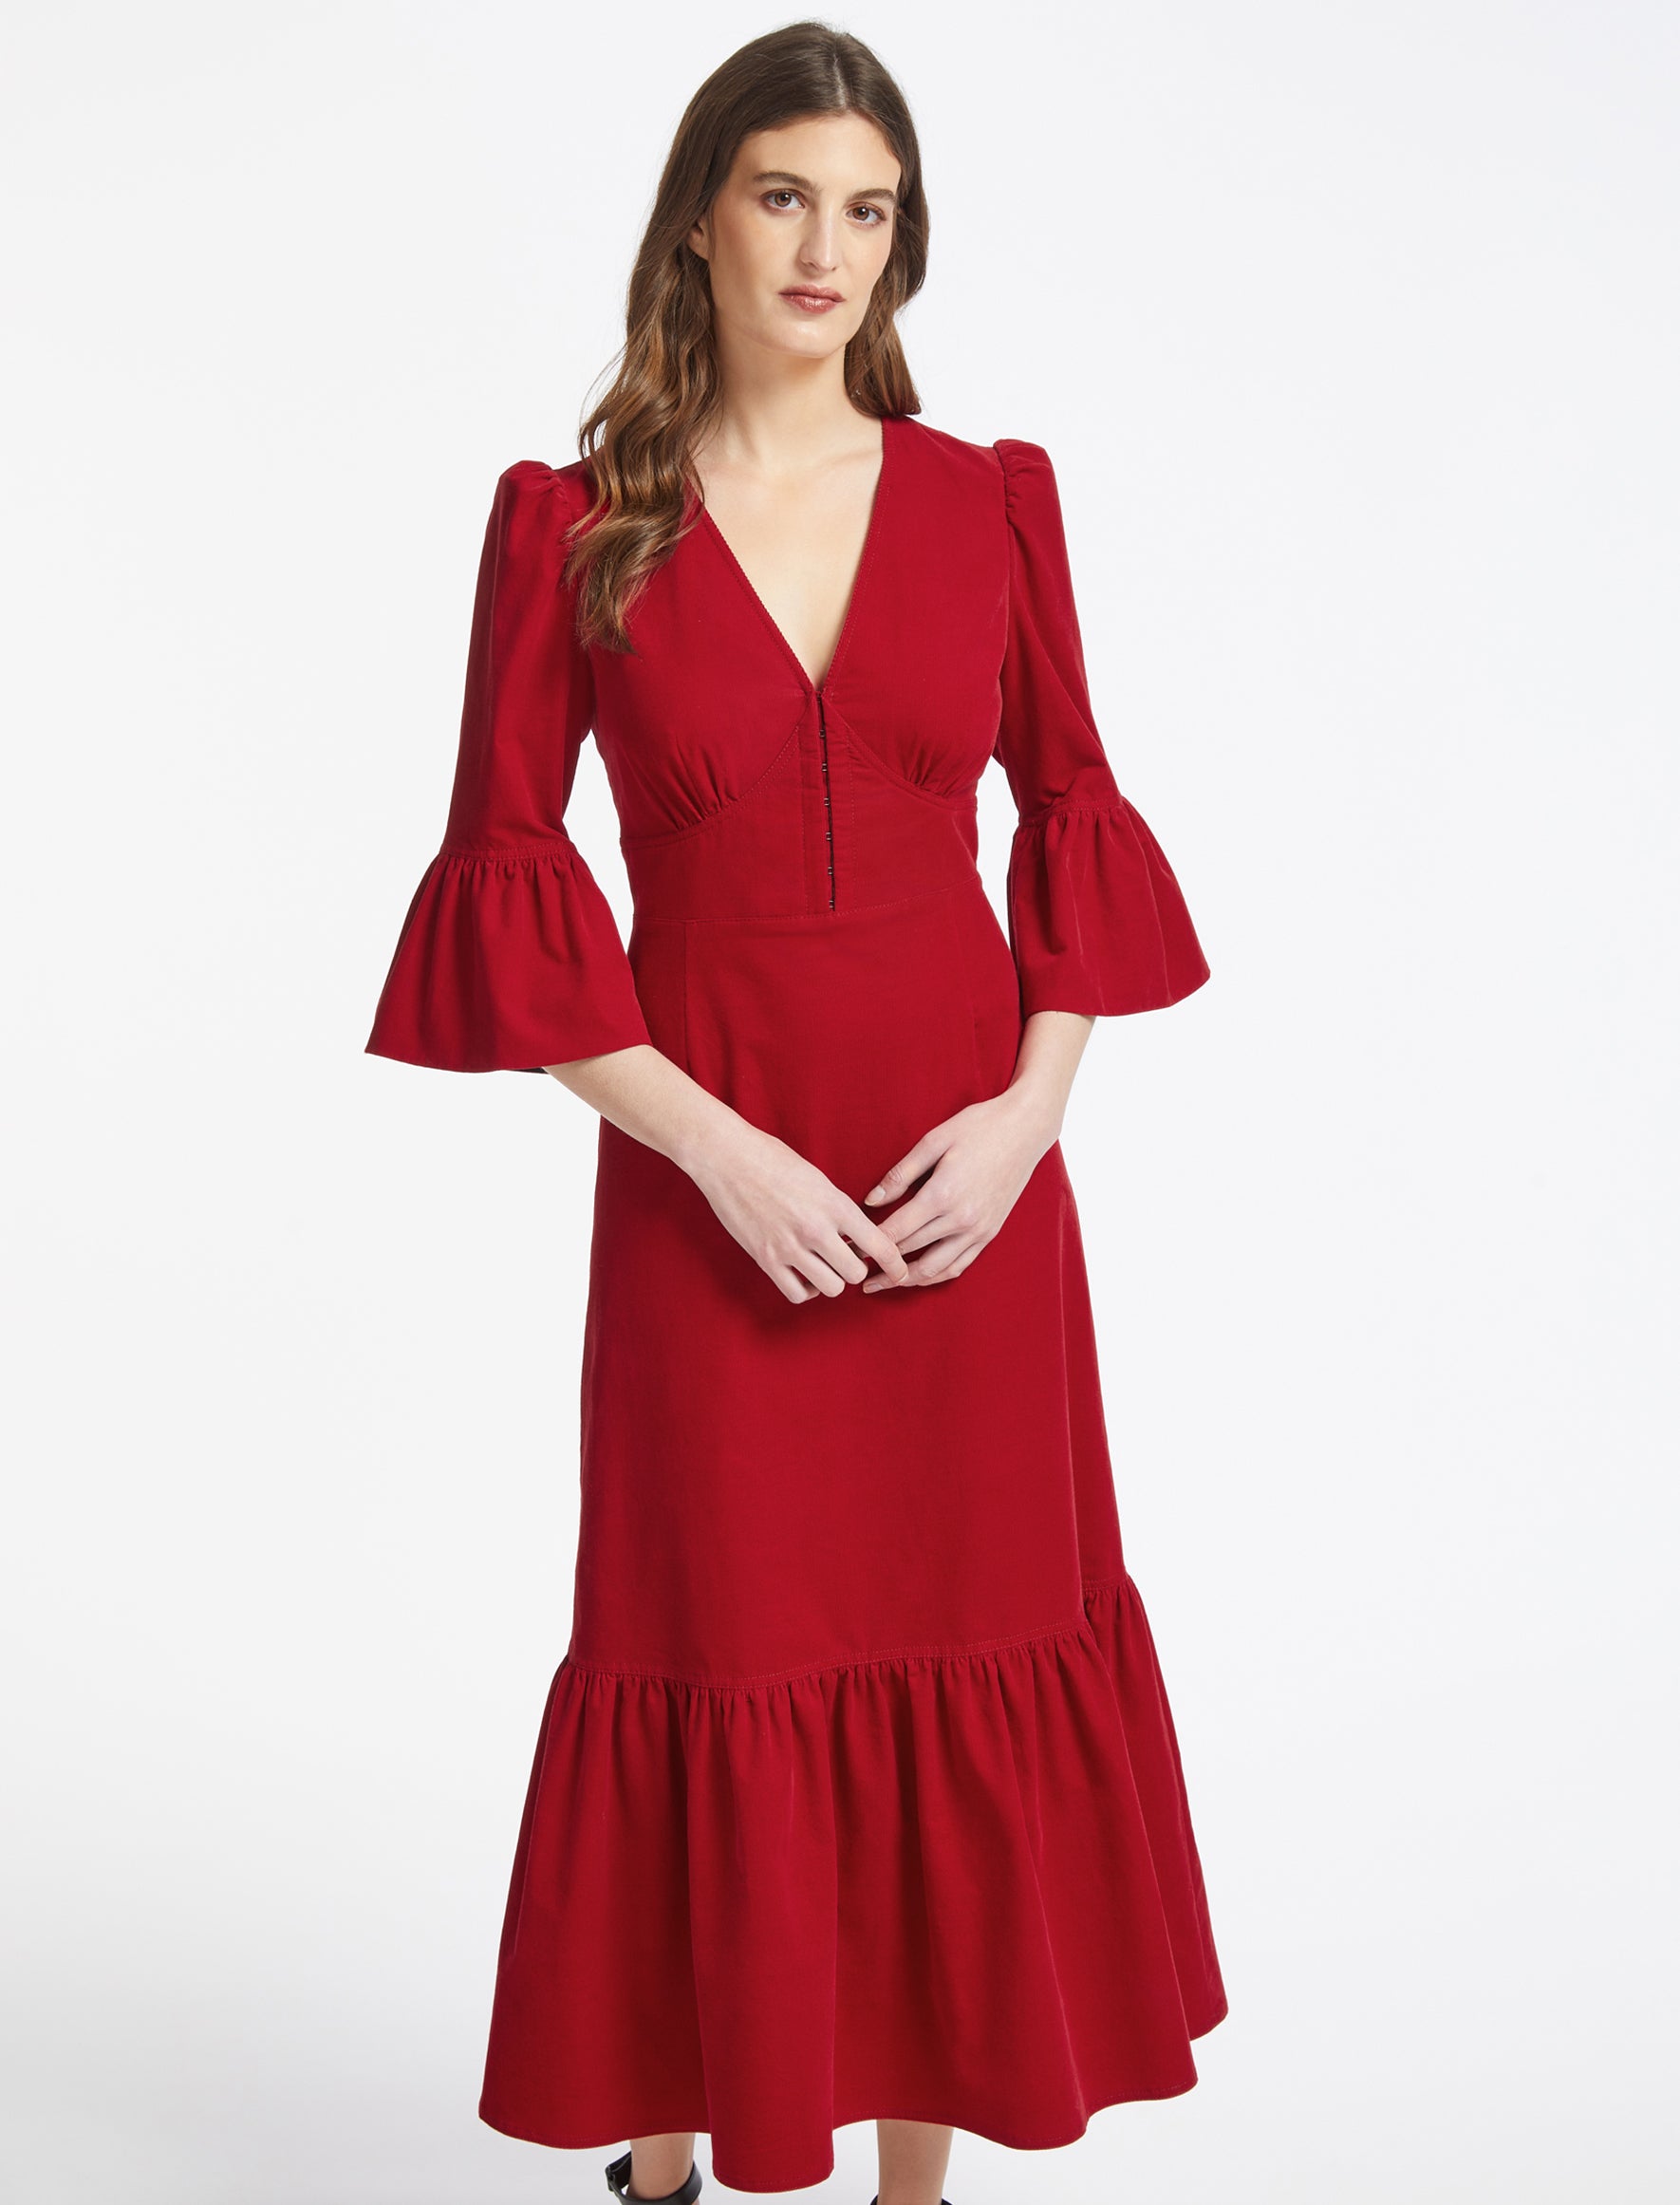 Daphne Pin Corduroy V Neck Maxi Dress In Red With 3 4 Length Gathered ...